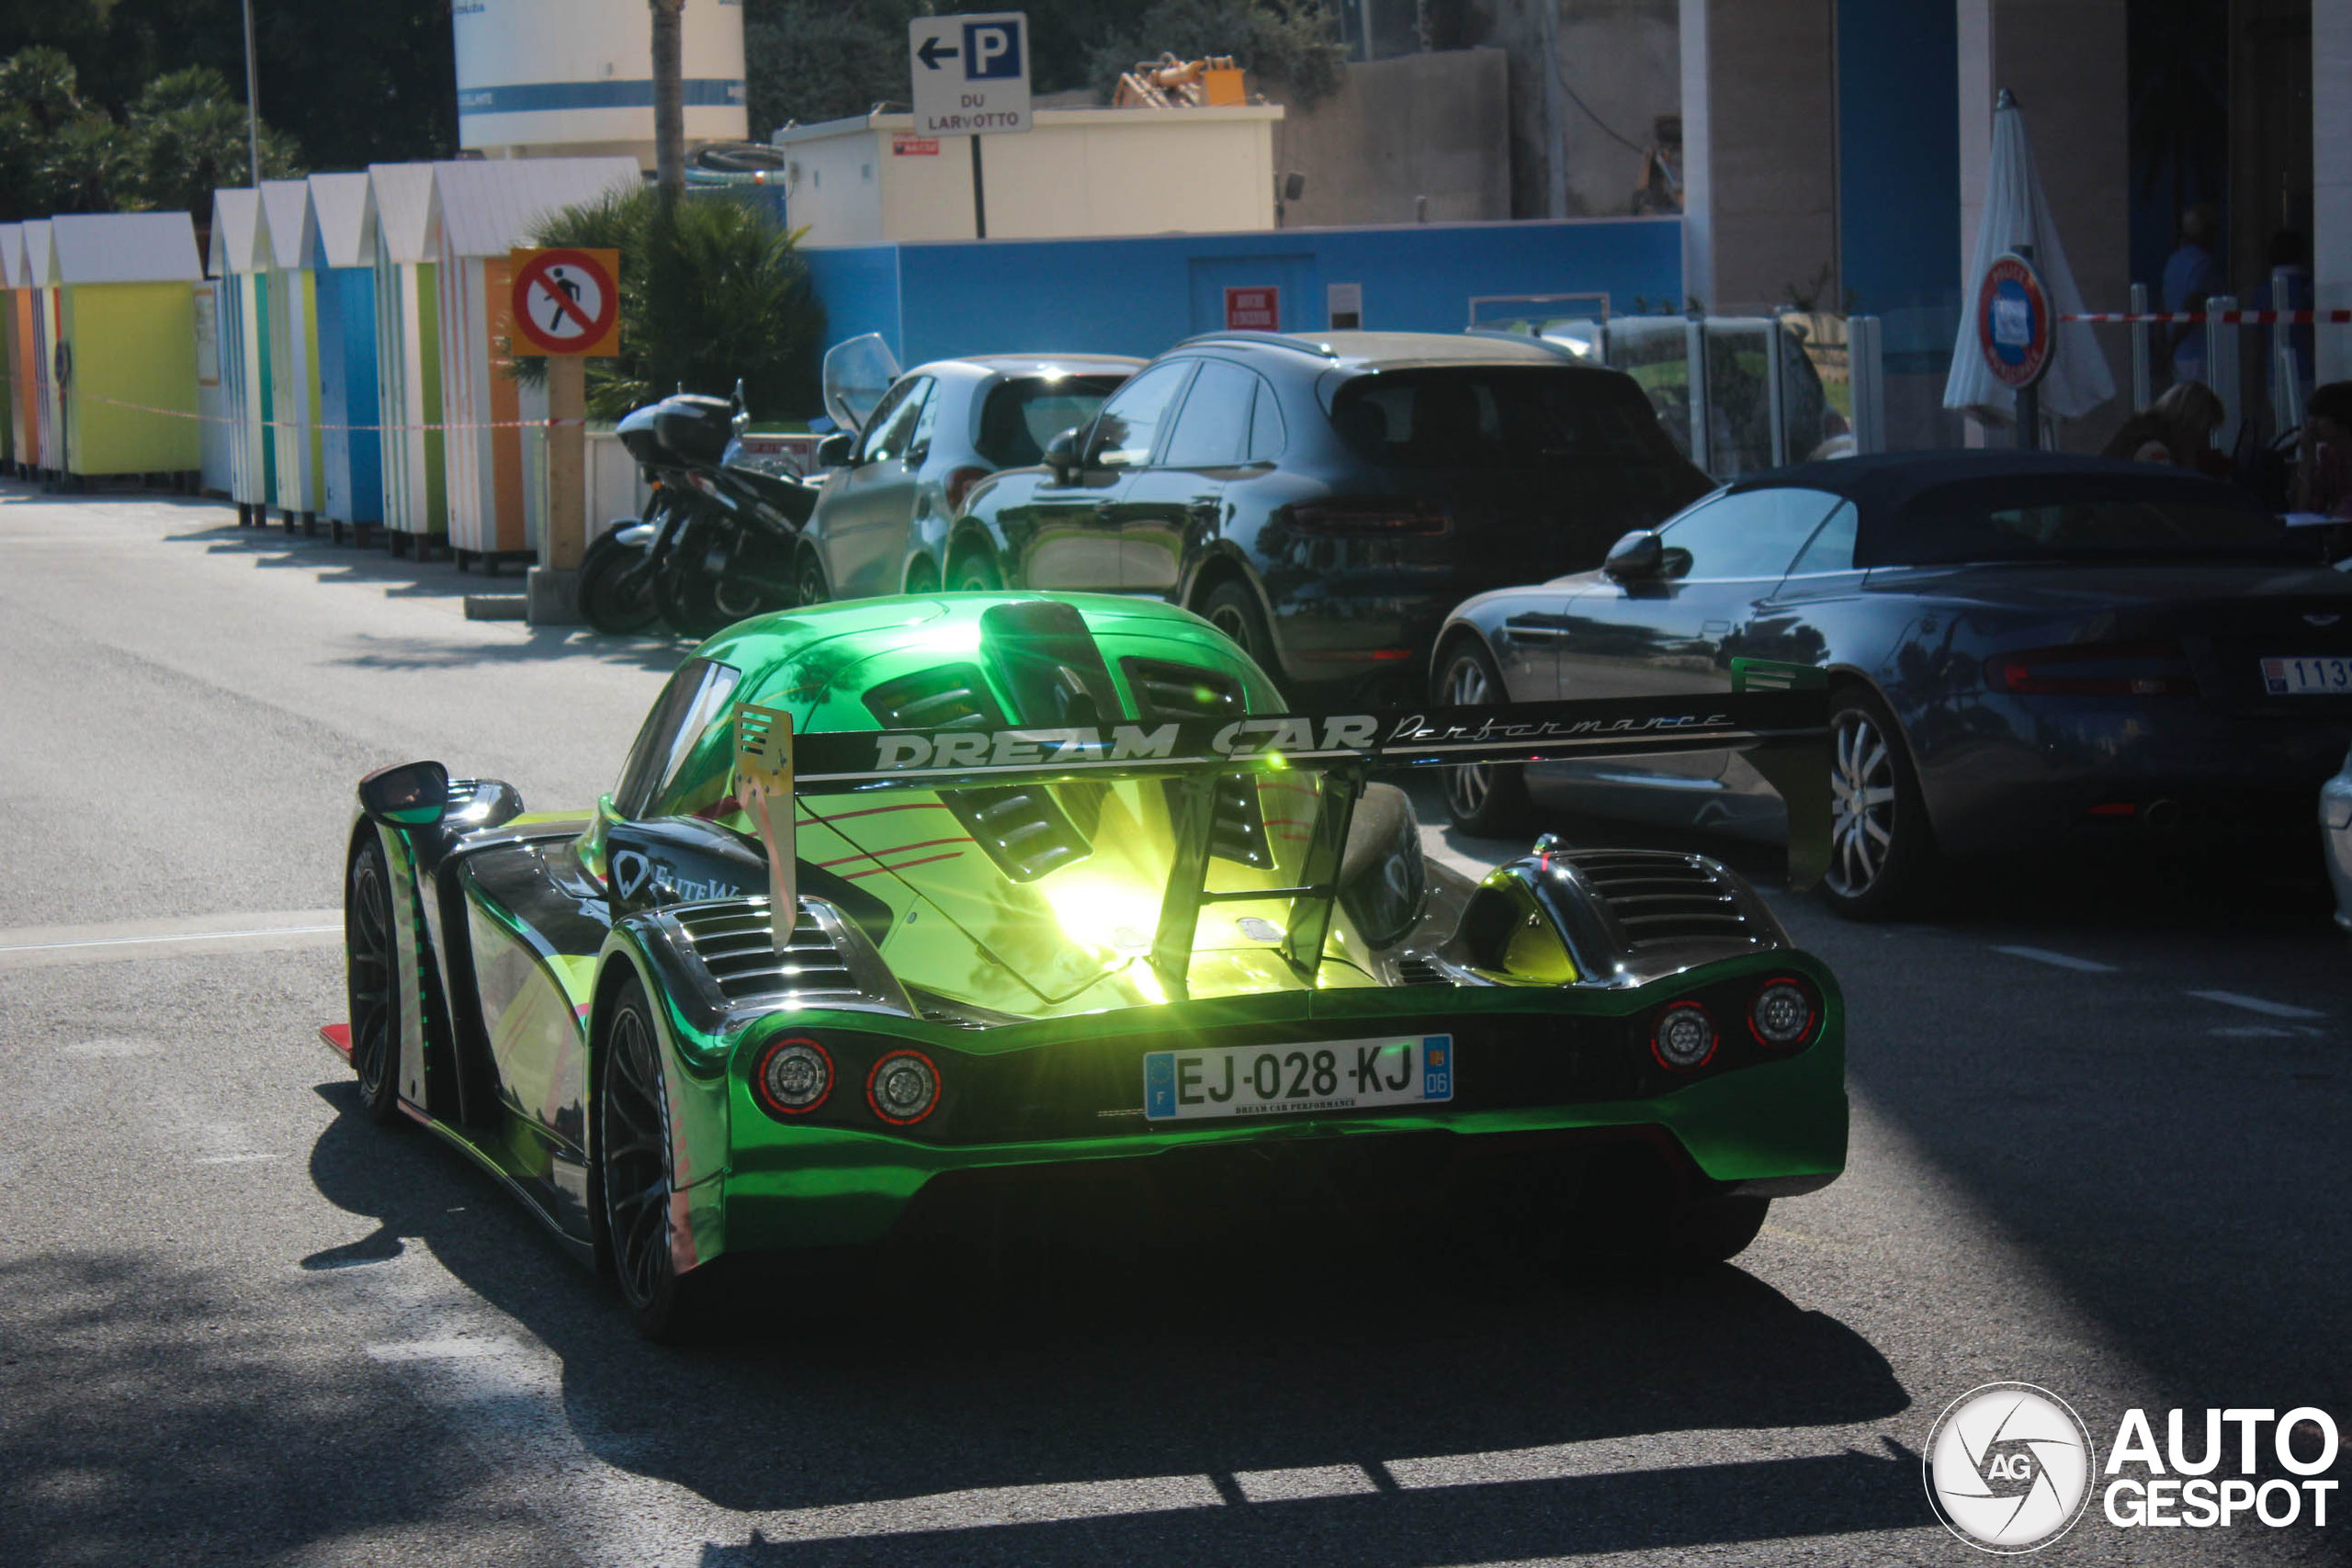 A Radical RXC Turbo 500R shows up in Monaco